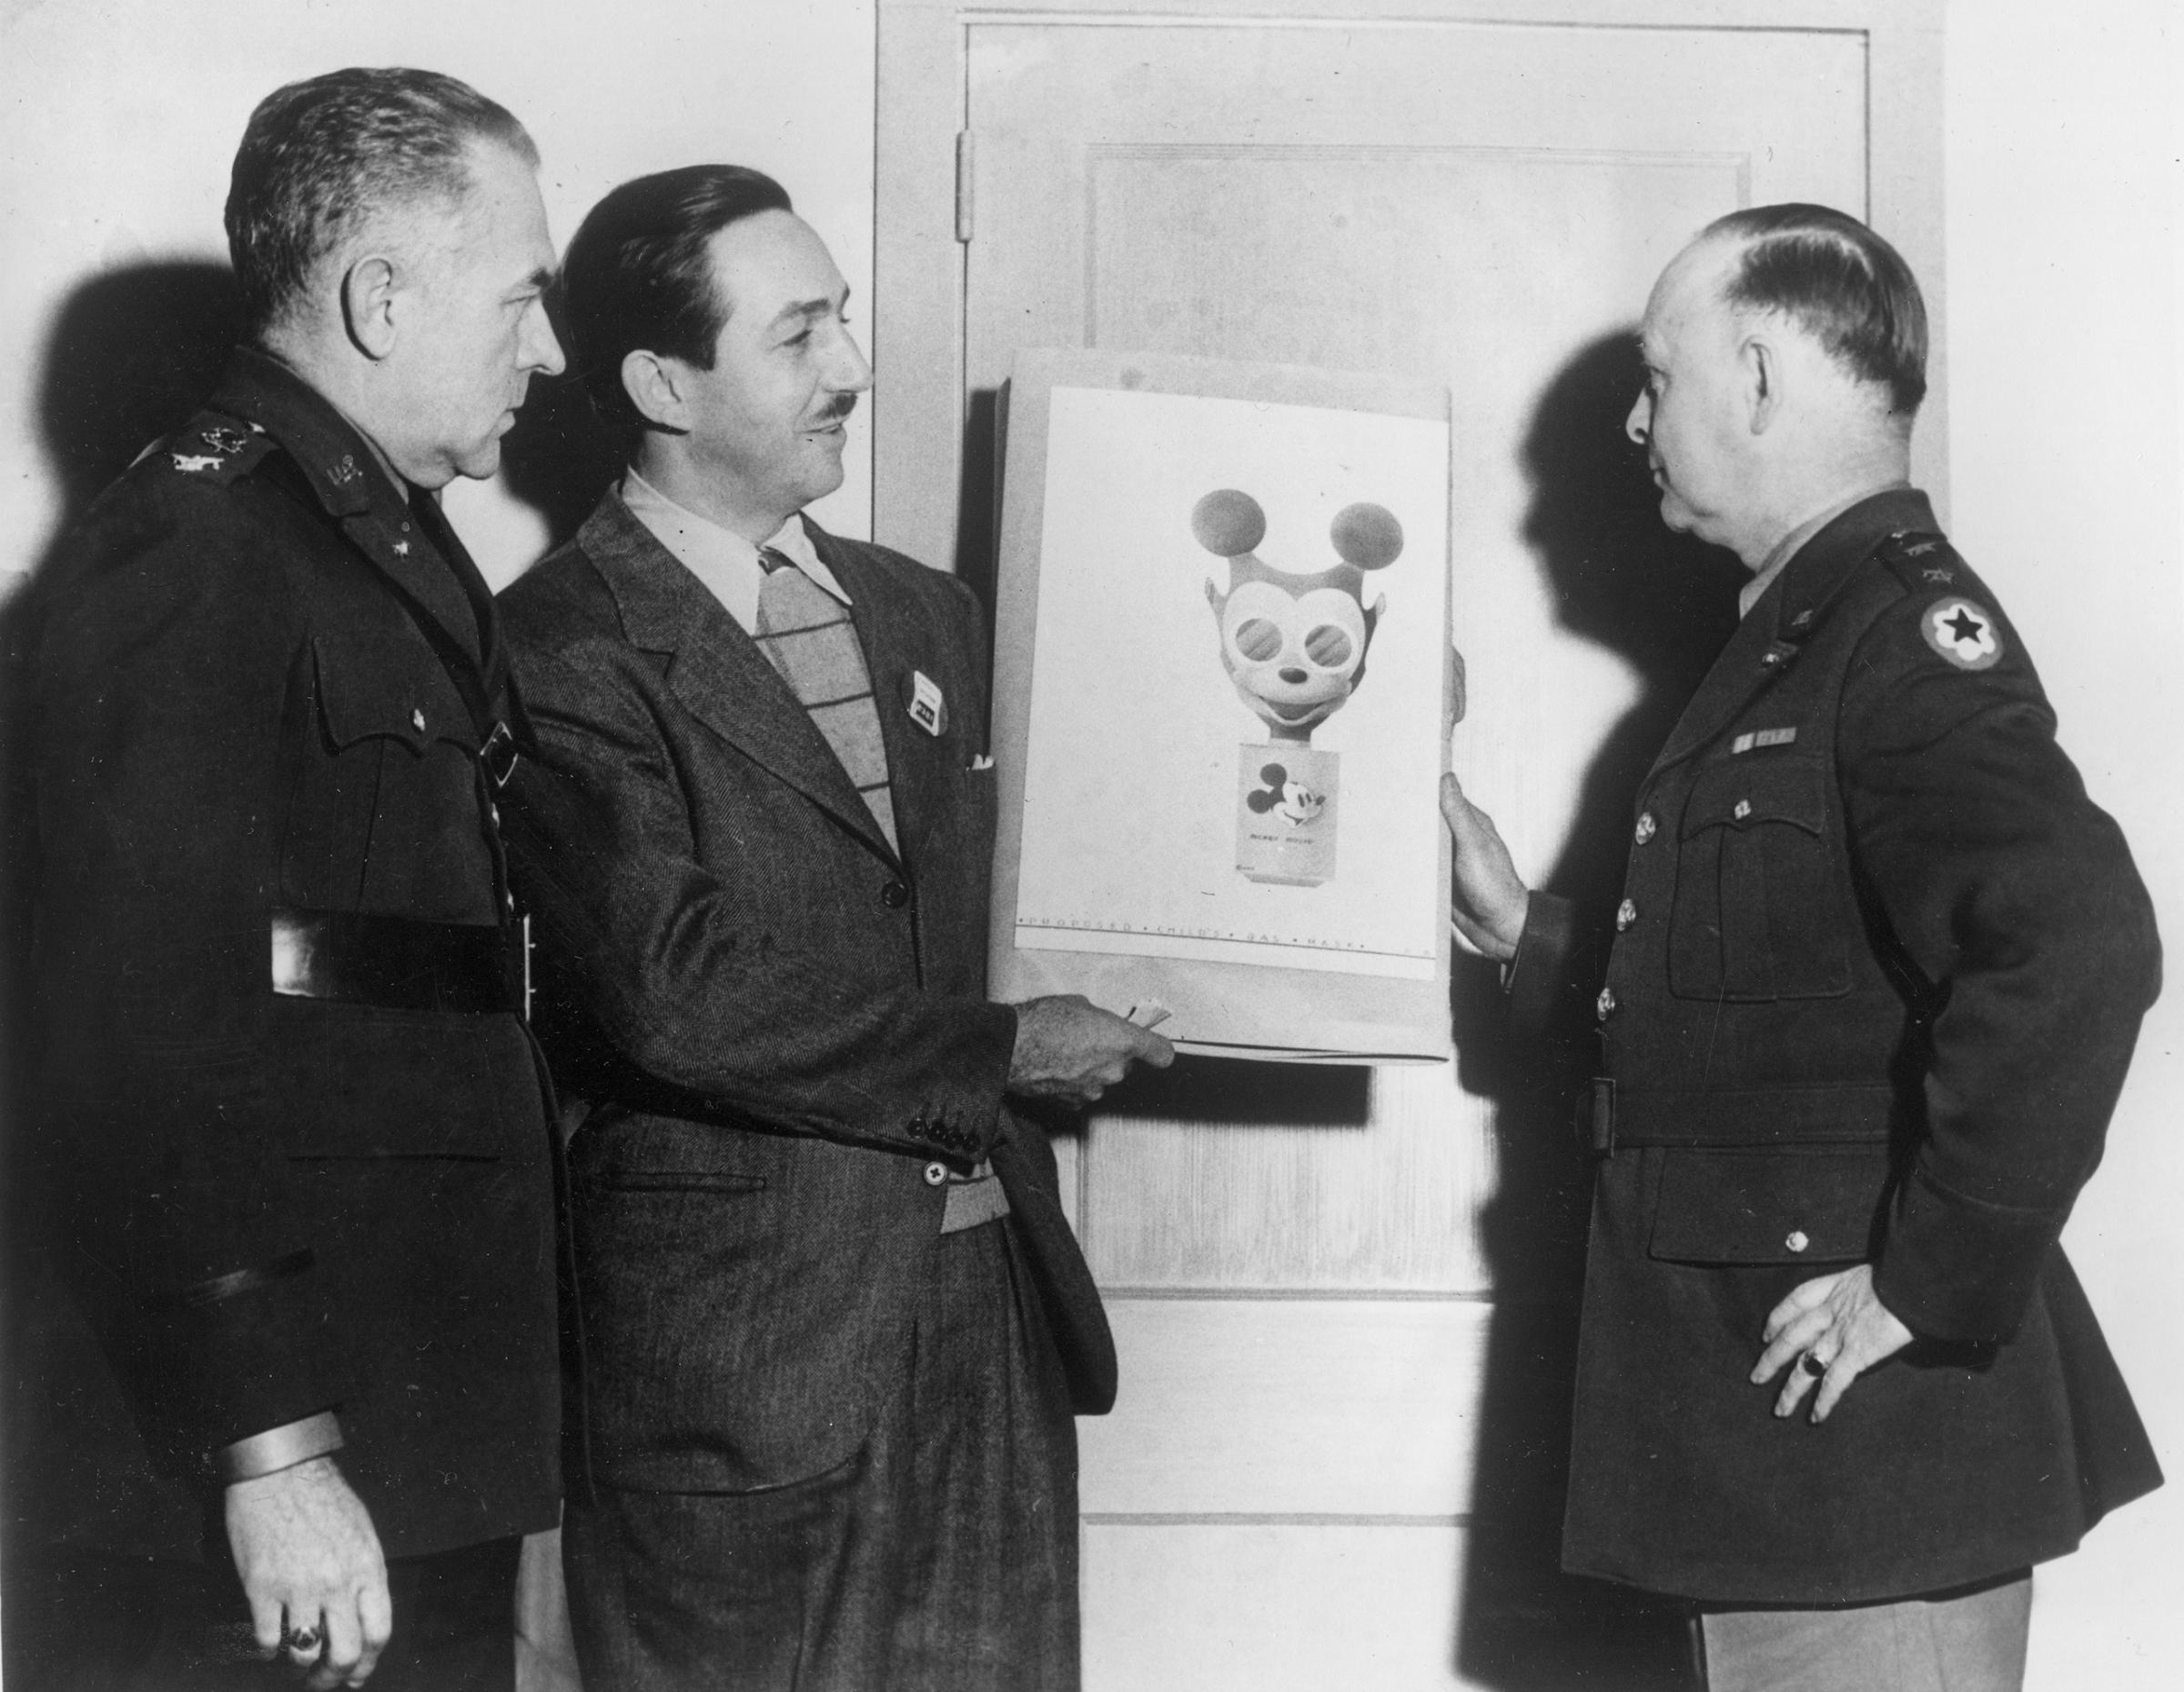 Animator Walt Disney, second from left, hands over his sketch of a Mickey Mouse gas mask to Maj. Gen. William Porter, right, in Washington, D.C., Jan. 8, 1942. Civilian defense and chemical warfare officers plan to produce the design intended to encourage children to use their mask readily for protection during World War II.